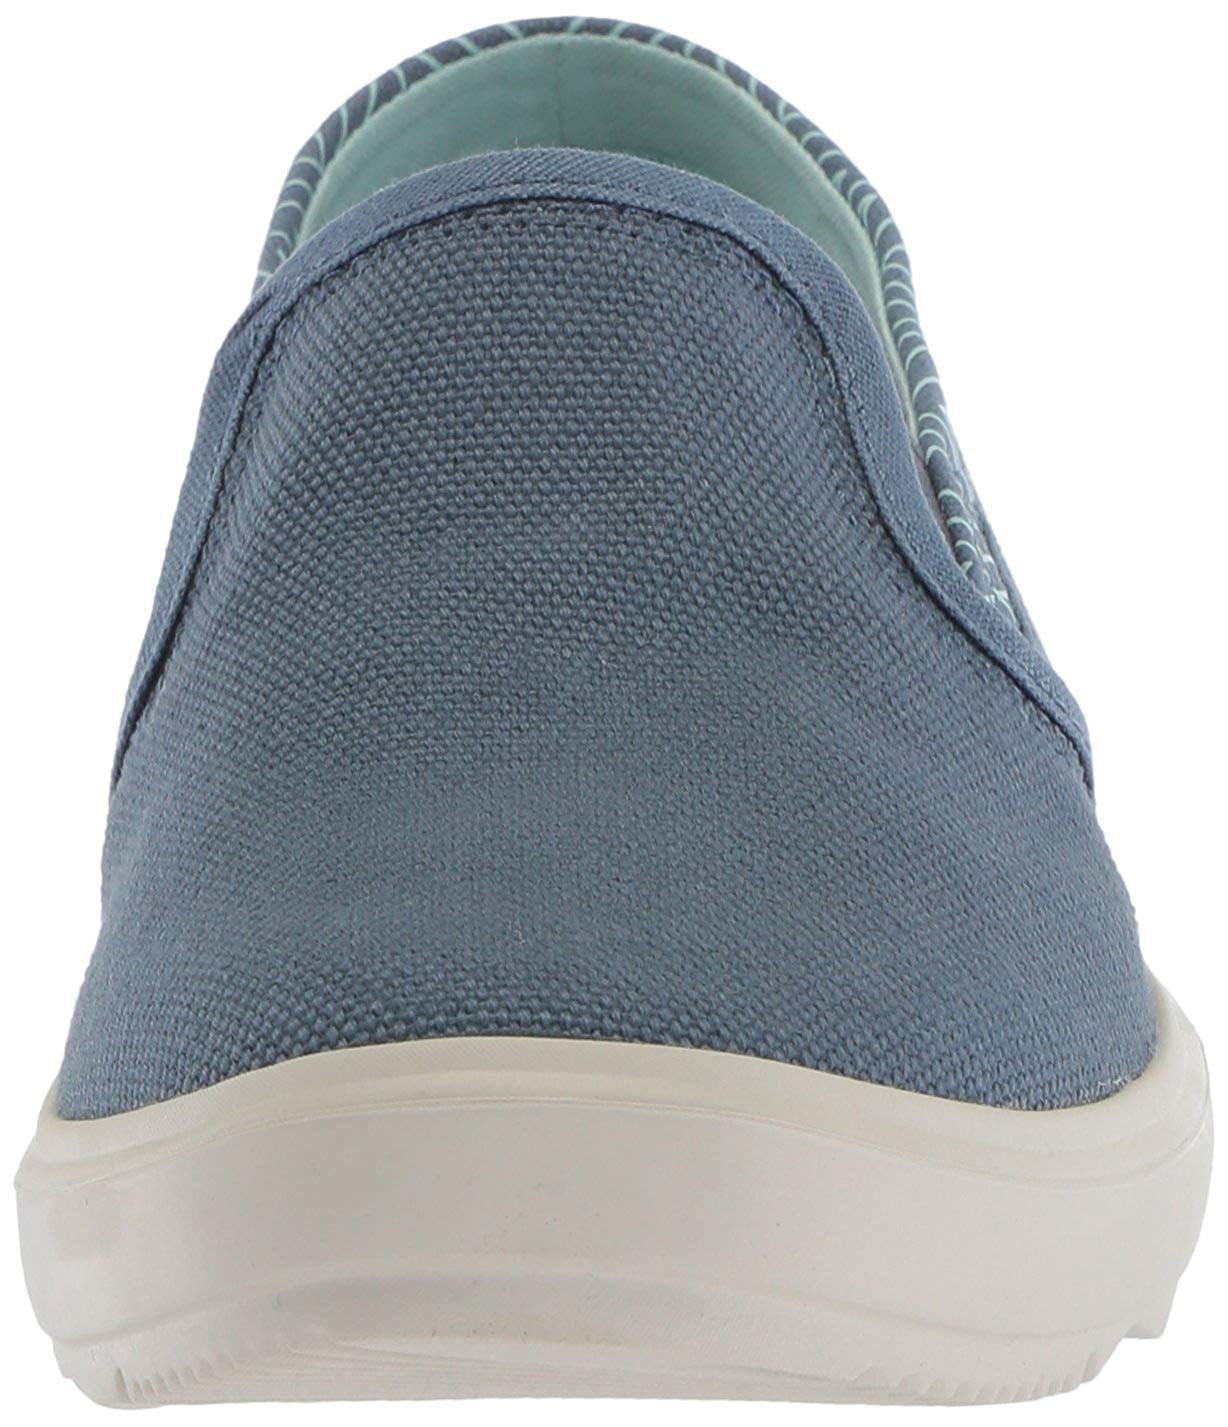 Around Town City Moc Canvas Sneaker 